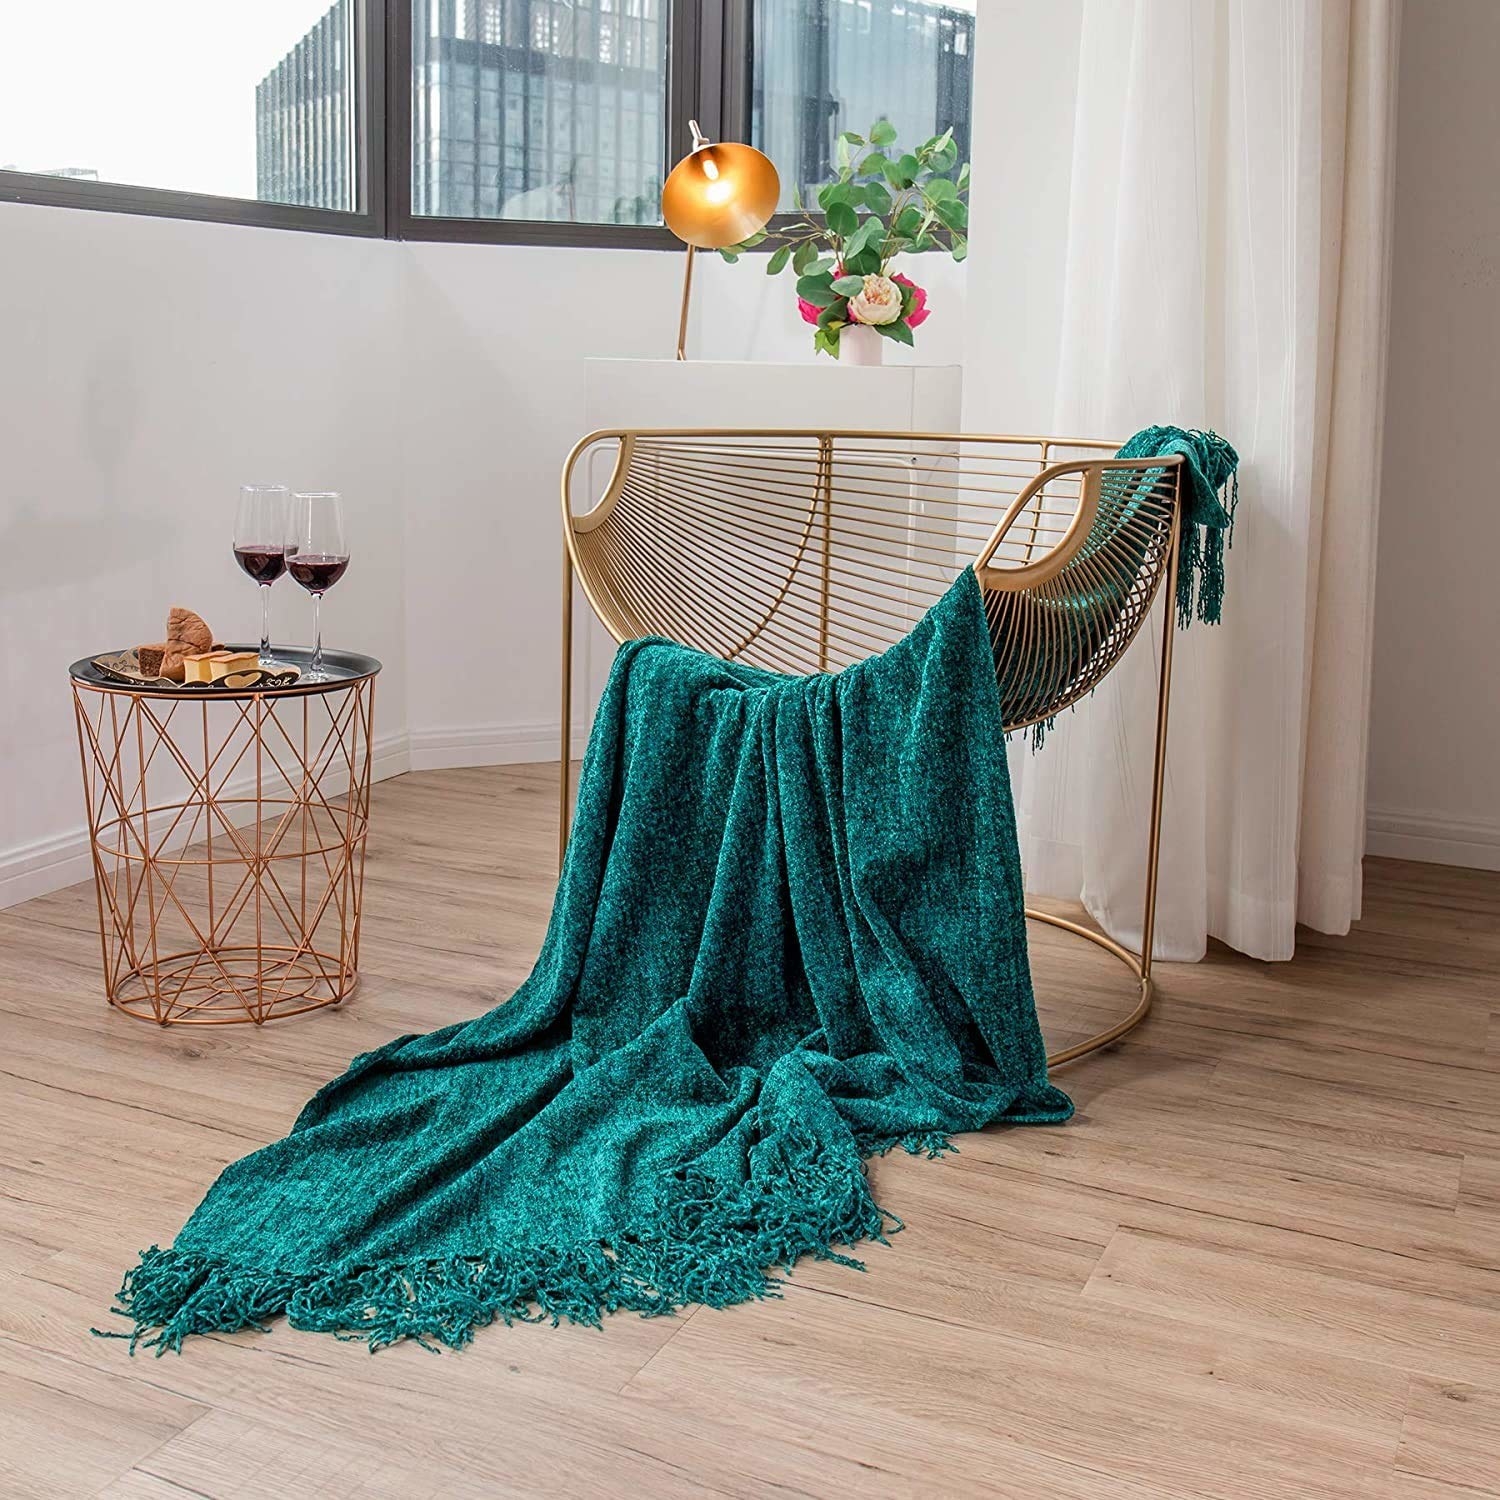 A teal blanket on a chair